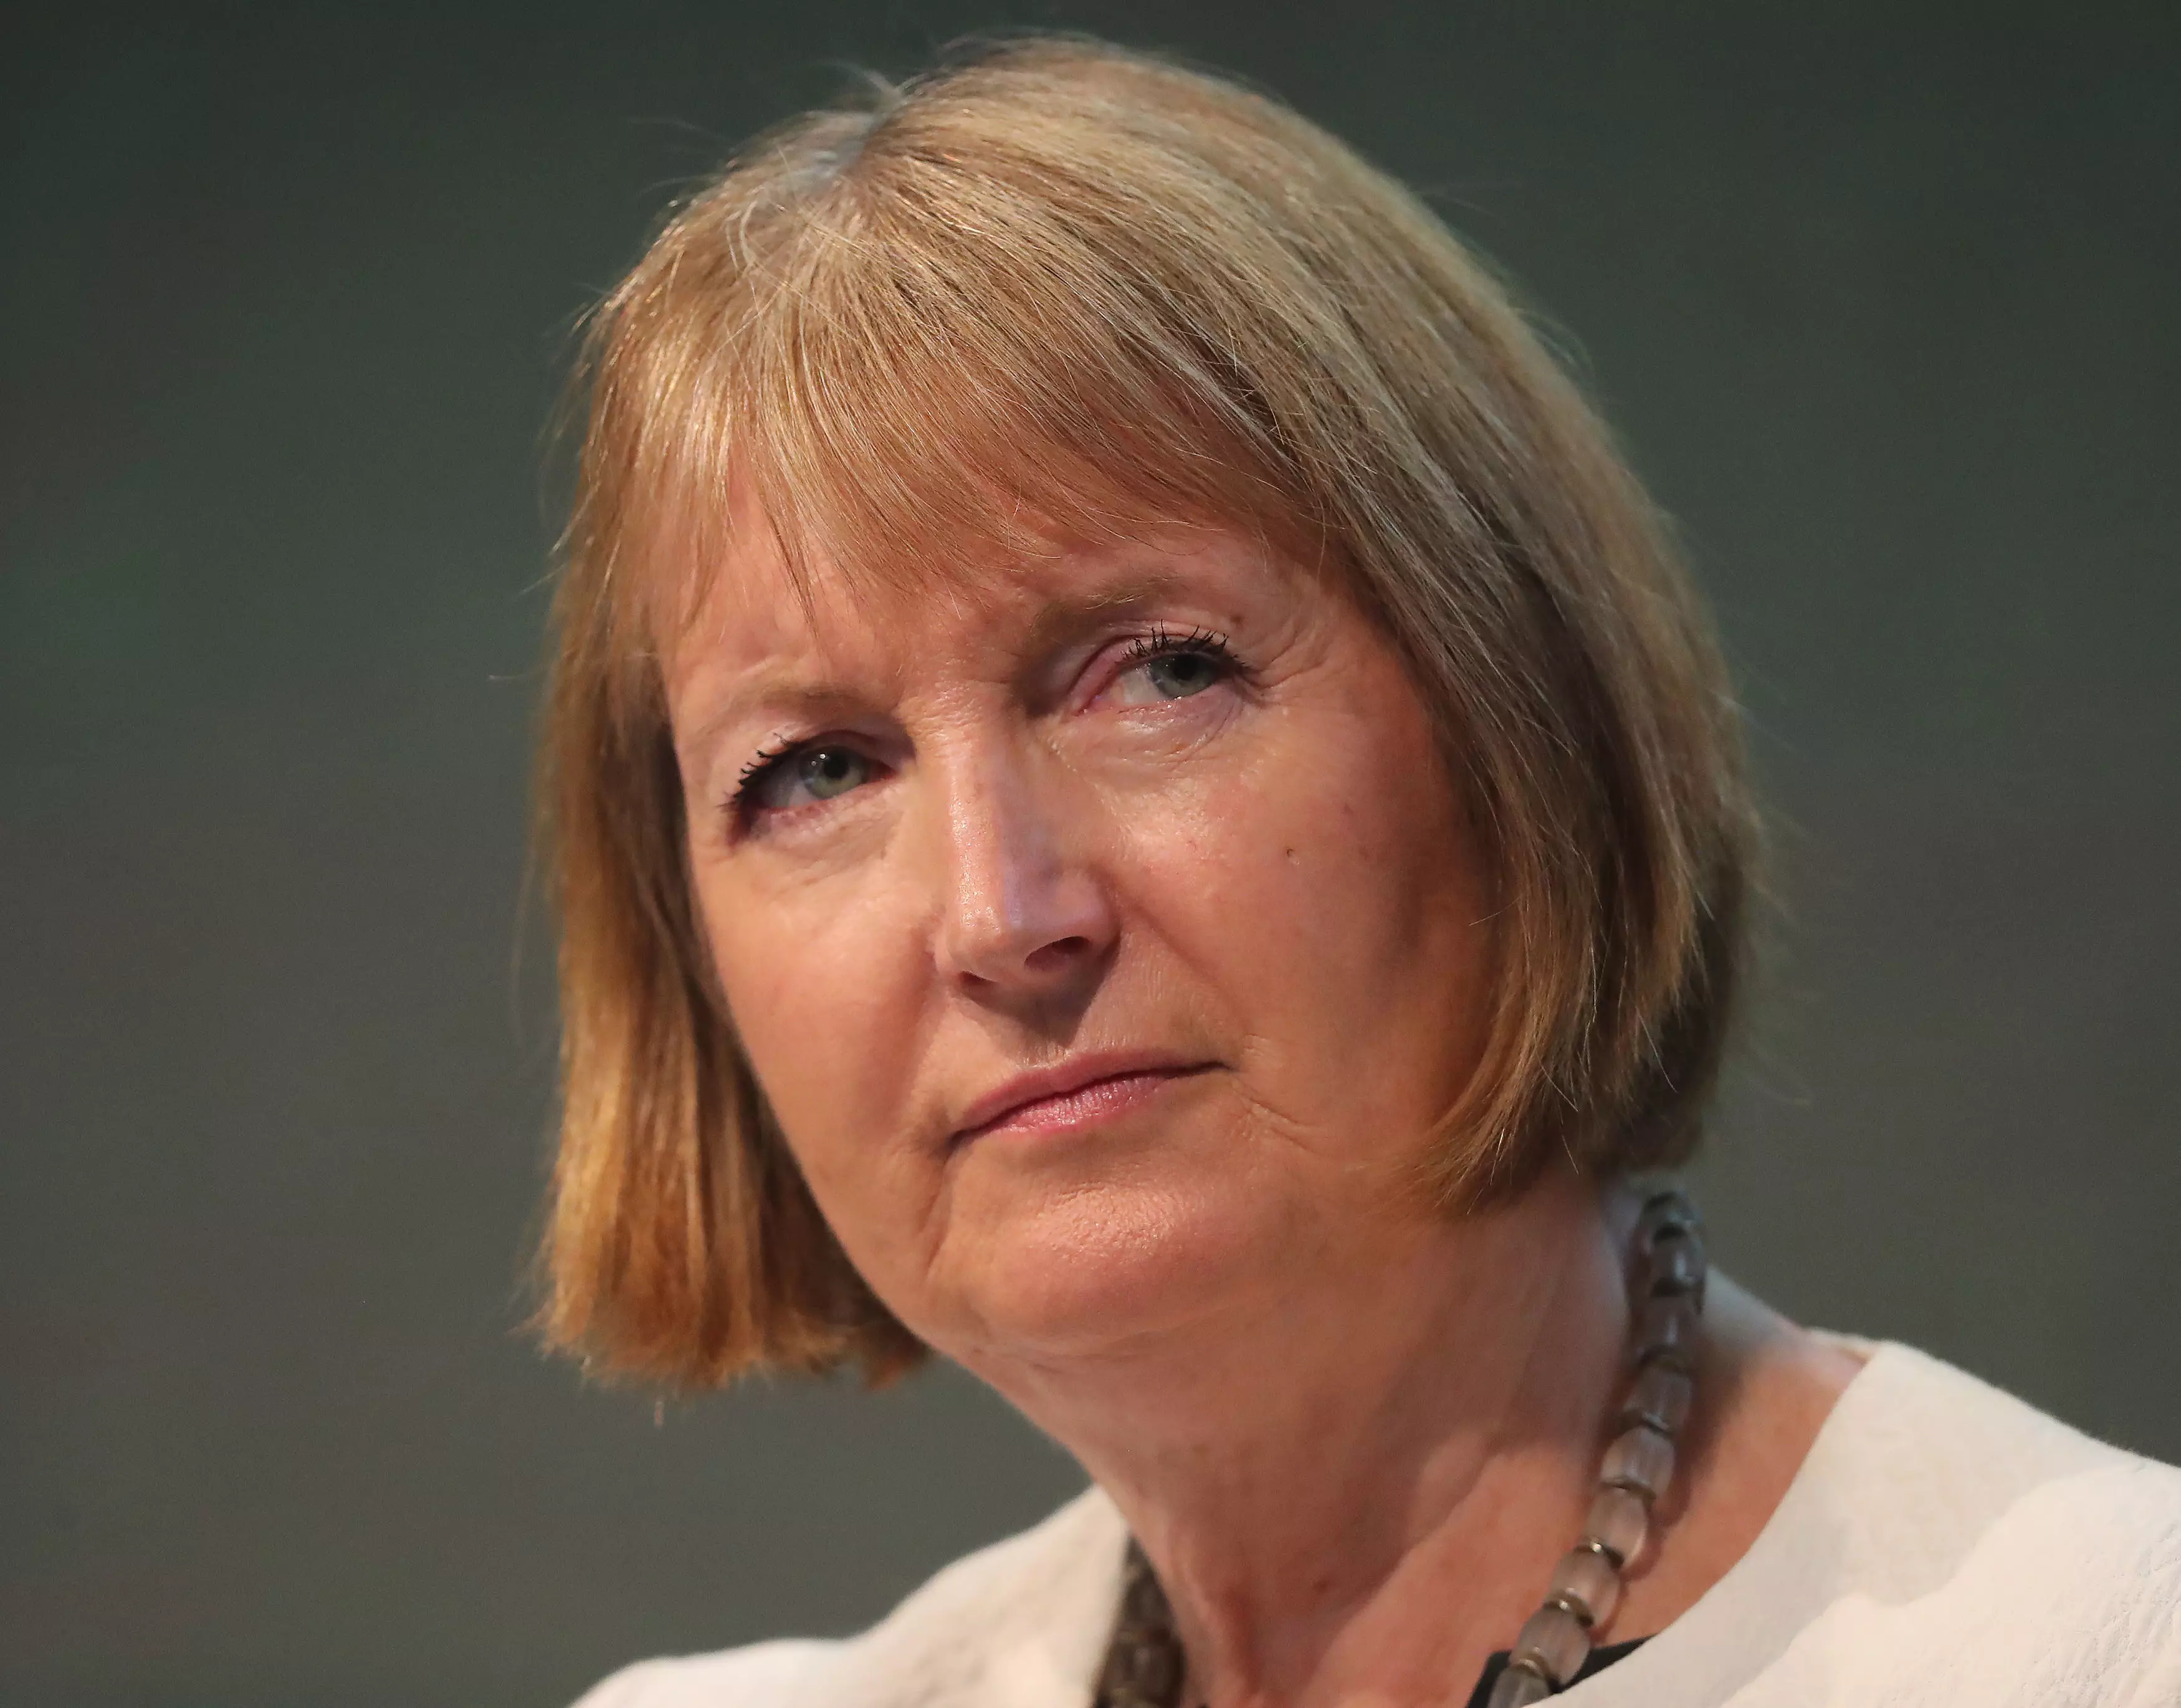 Harriet Harman has spoken out saying the government needs to be tougher on misogyny (